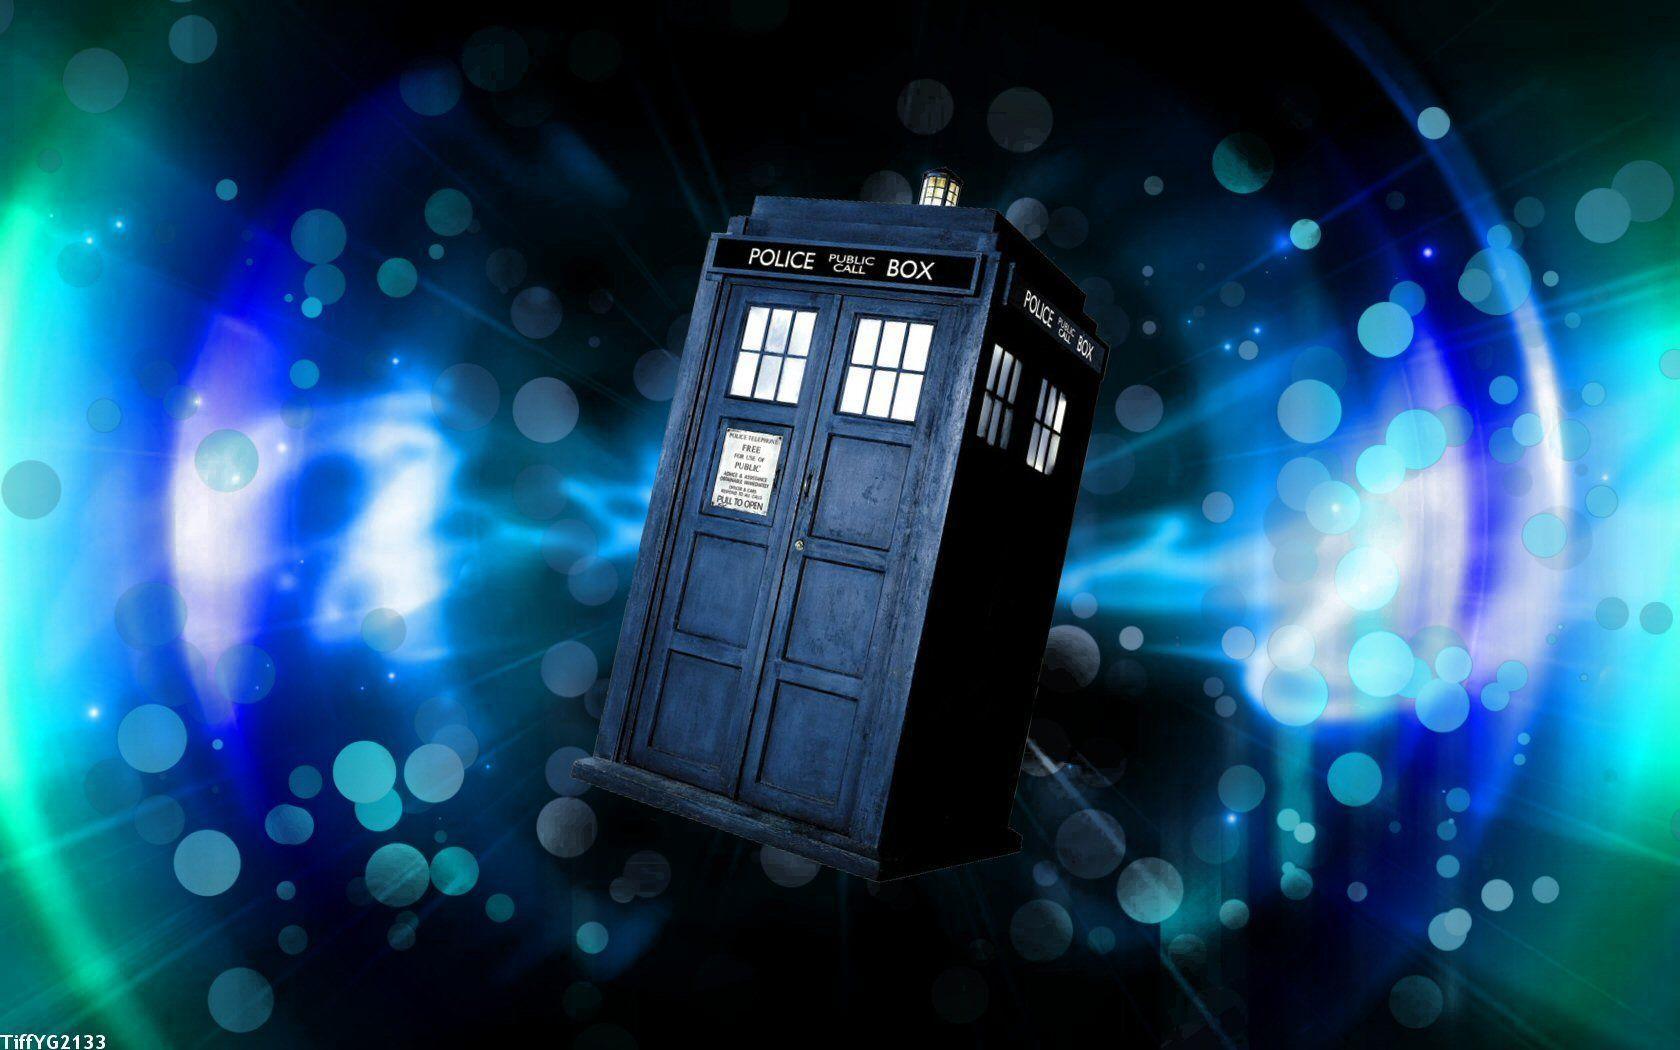 Fascinating Doctor Who Tardis Wallpaper 1680x1050PX Doctor Who